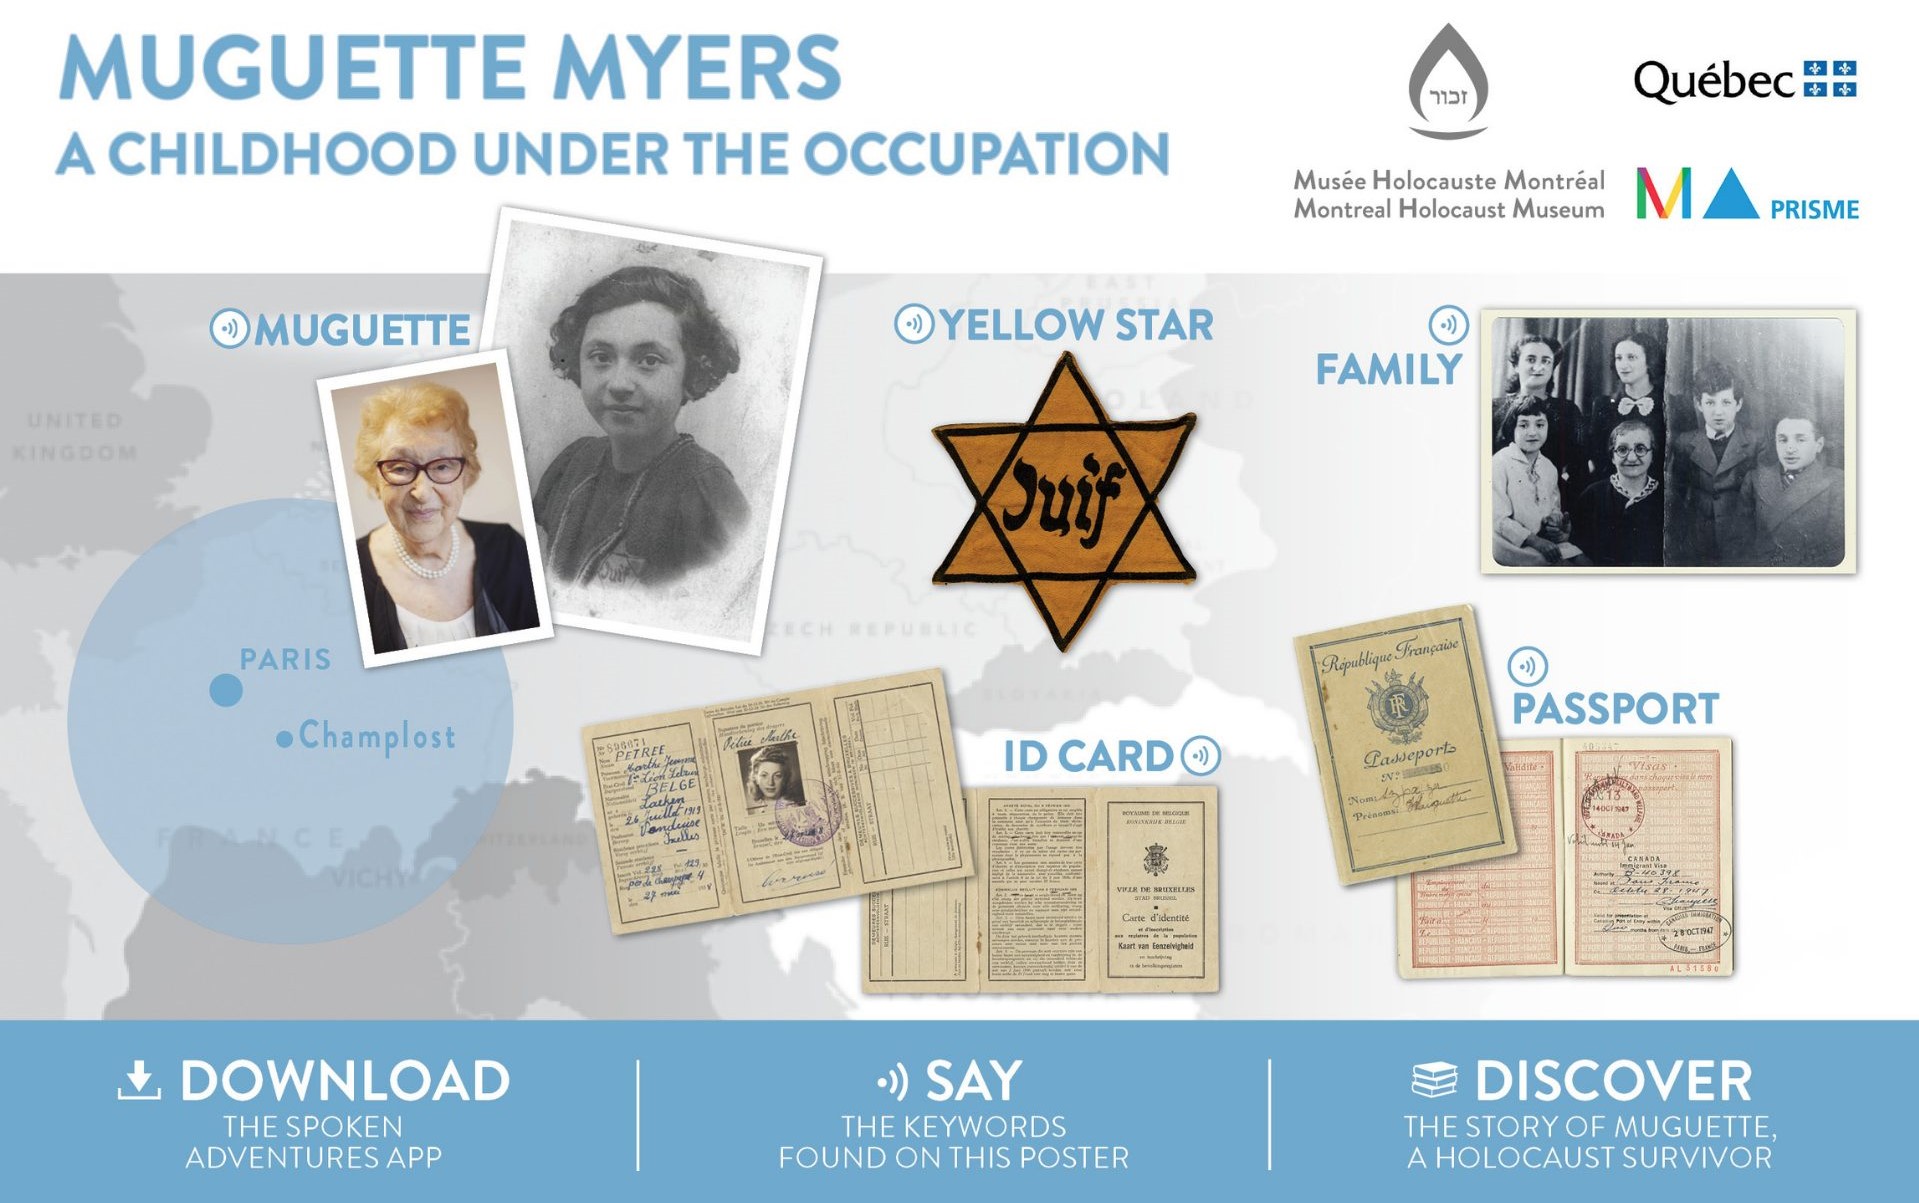 Activity poster for Muguette Myers, a childhood under the occupation